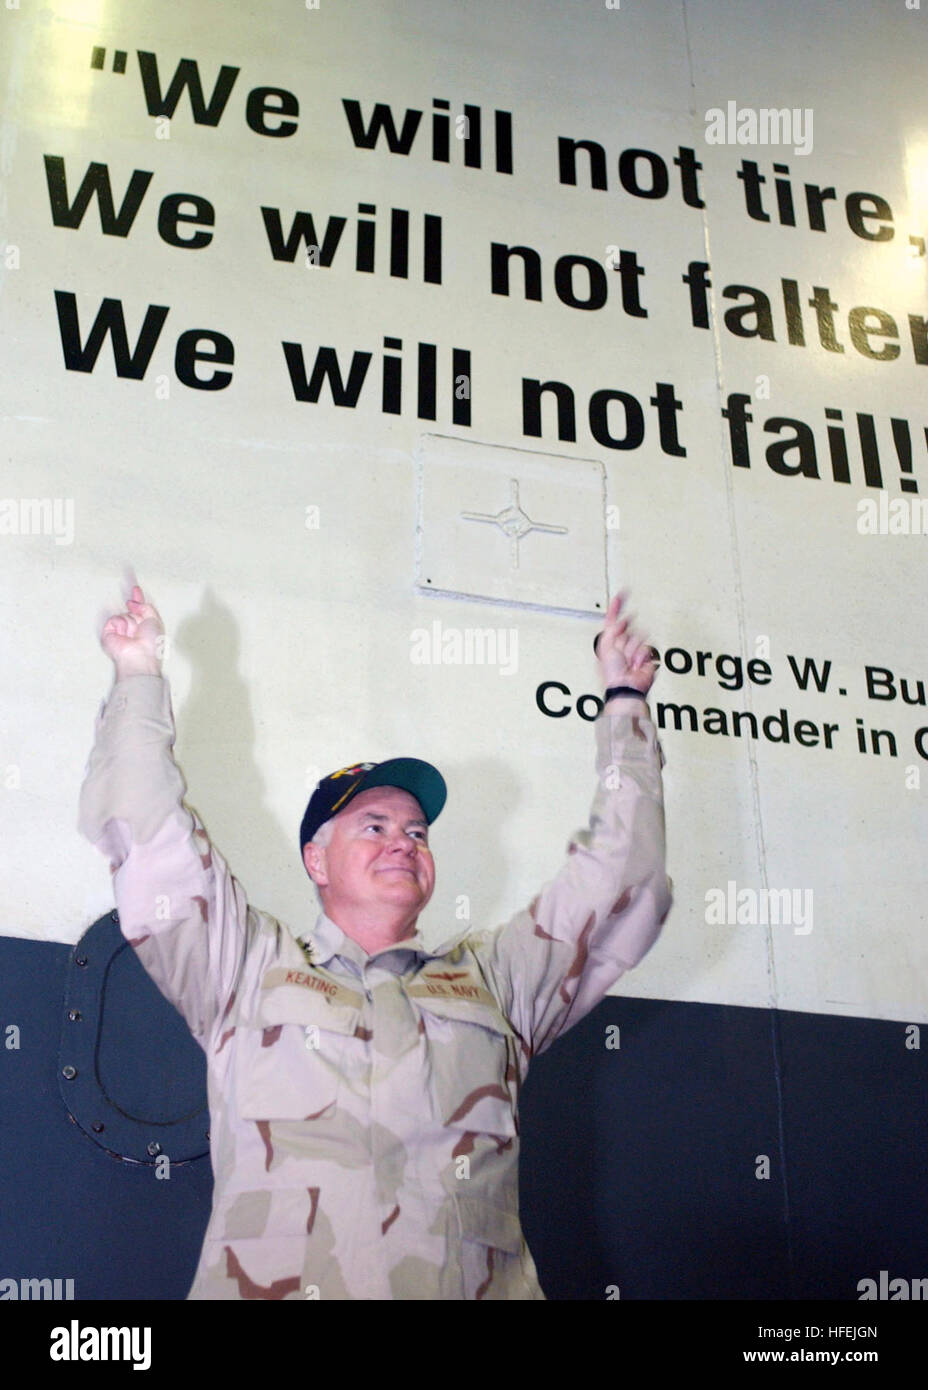 030415-N-8693O-002 The Arabian Gulf (Apr. 15, 2003)  -- Vice Adm. Timothy J. Keating, Commander, Fifth Fleet uses a quote painted on the shipÕs hanger bay divisional doors, ÒWe will not tire, we will not falter, we will not fail,Ó to represent the efforts of the shipÕs crew aboard USS Constellation (CV 64).  Constellation and Carrier Air Wing Two (CVW-2) are deployed in support of Operation Iraqi Freedom.  Operation Iraqi Freedom is the multinational coalition effort to liberate the Iraqi people, eliminate Iraq's weapons of mass destruction and end the regime of Saddam Hussein.  U.S. Navy phot Stock Photo